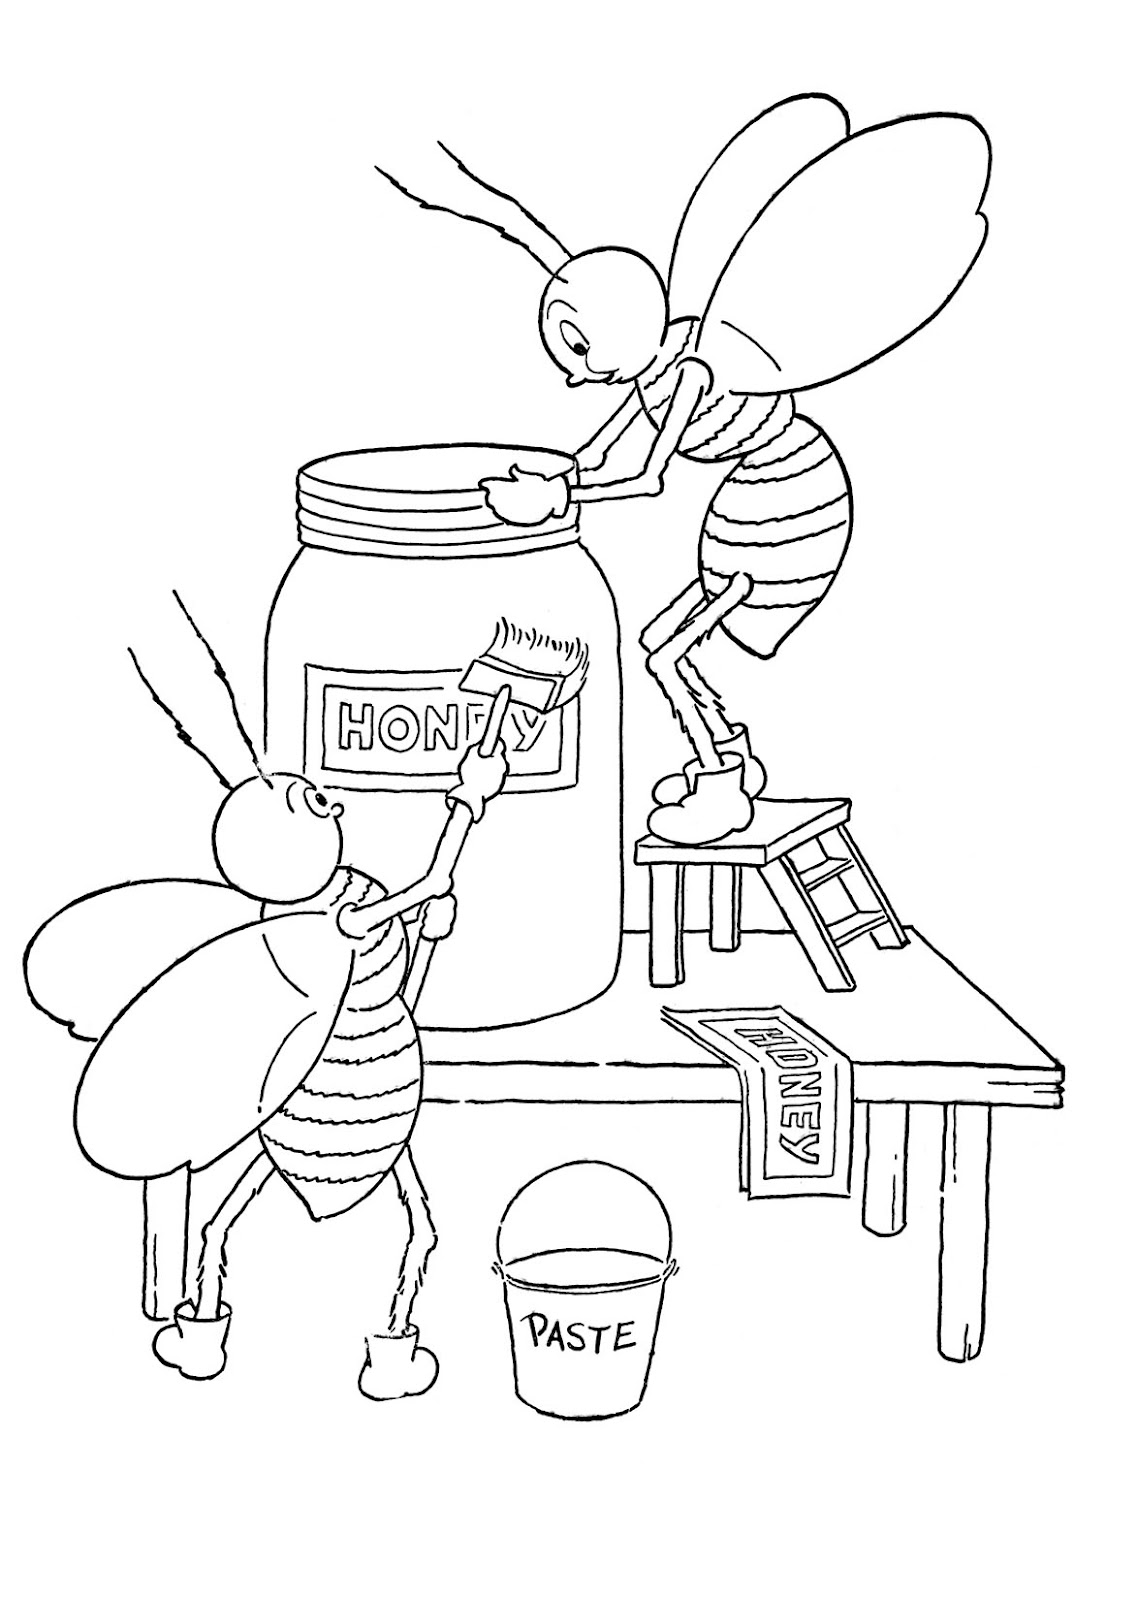 honey bee coloring page the best place for coloring page at coloringsky part 13 coloring bee page honey 